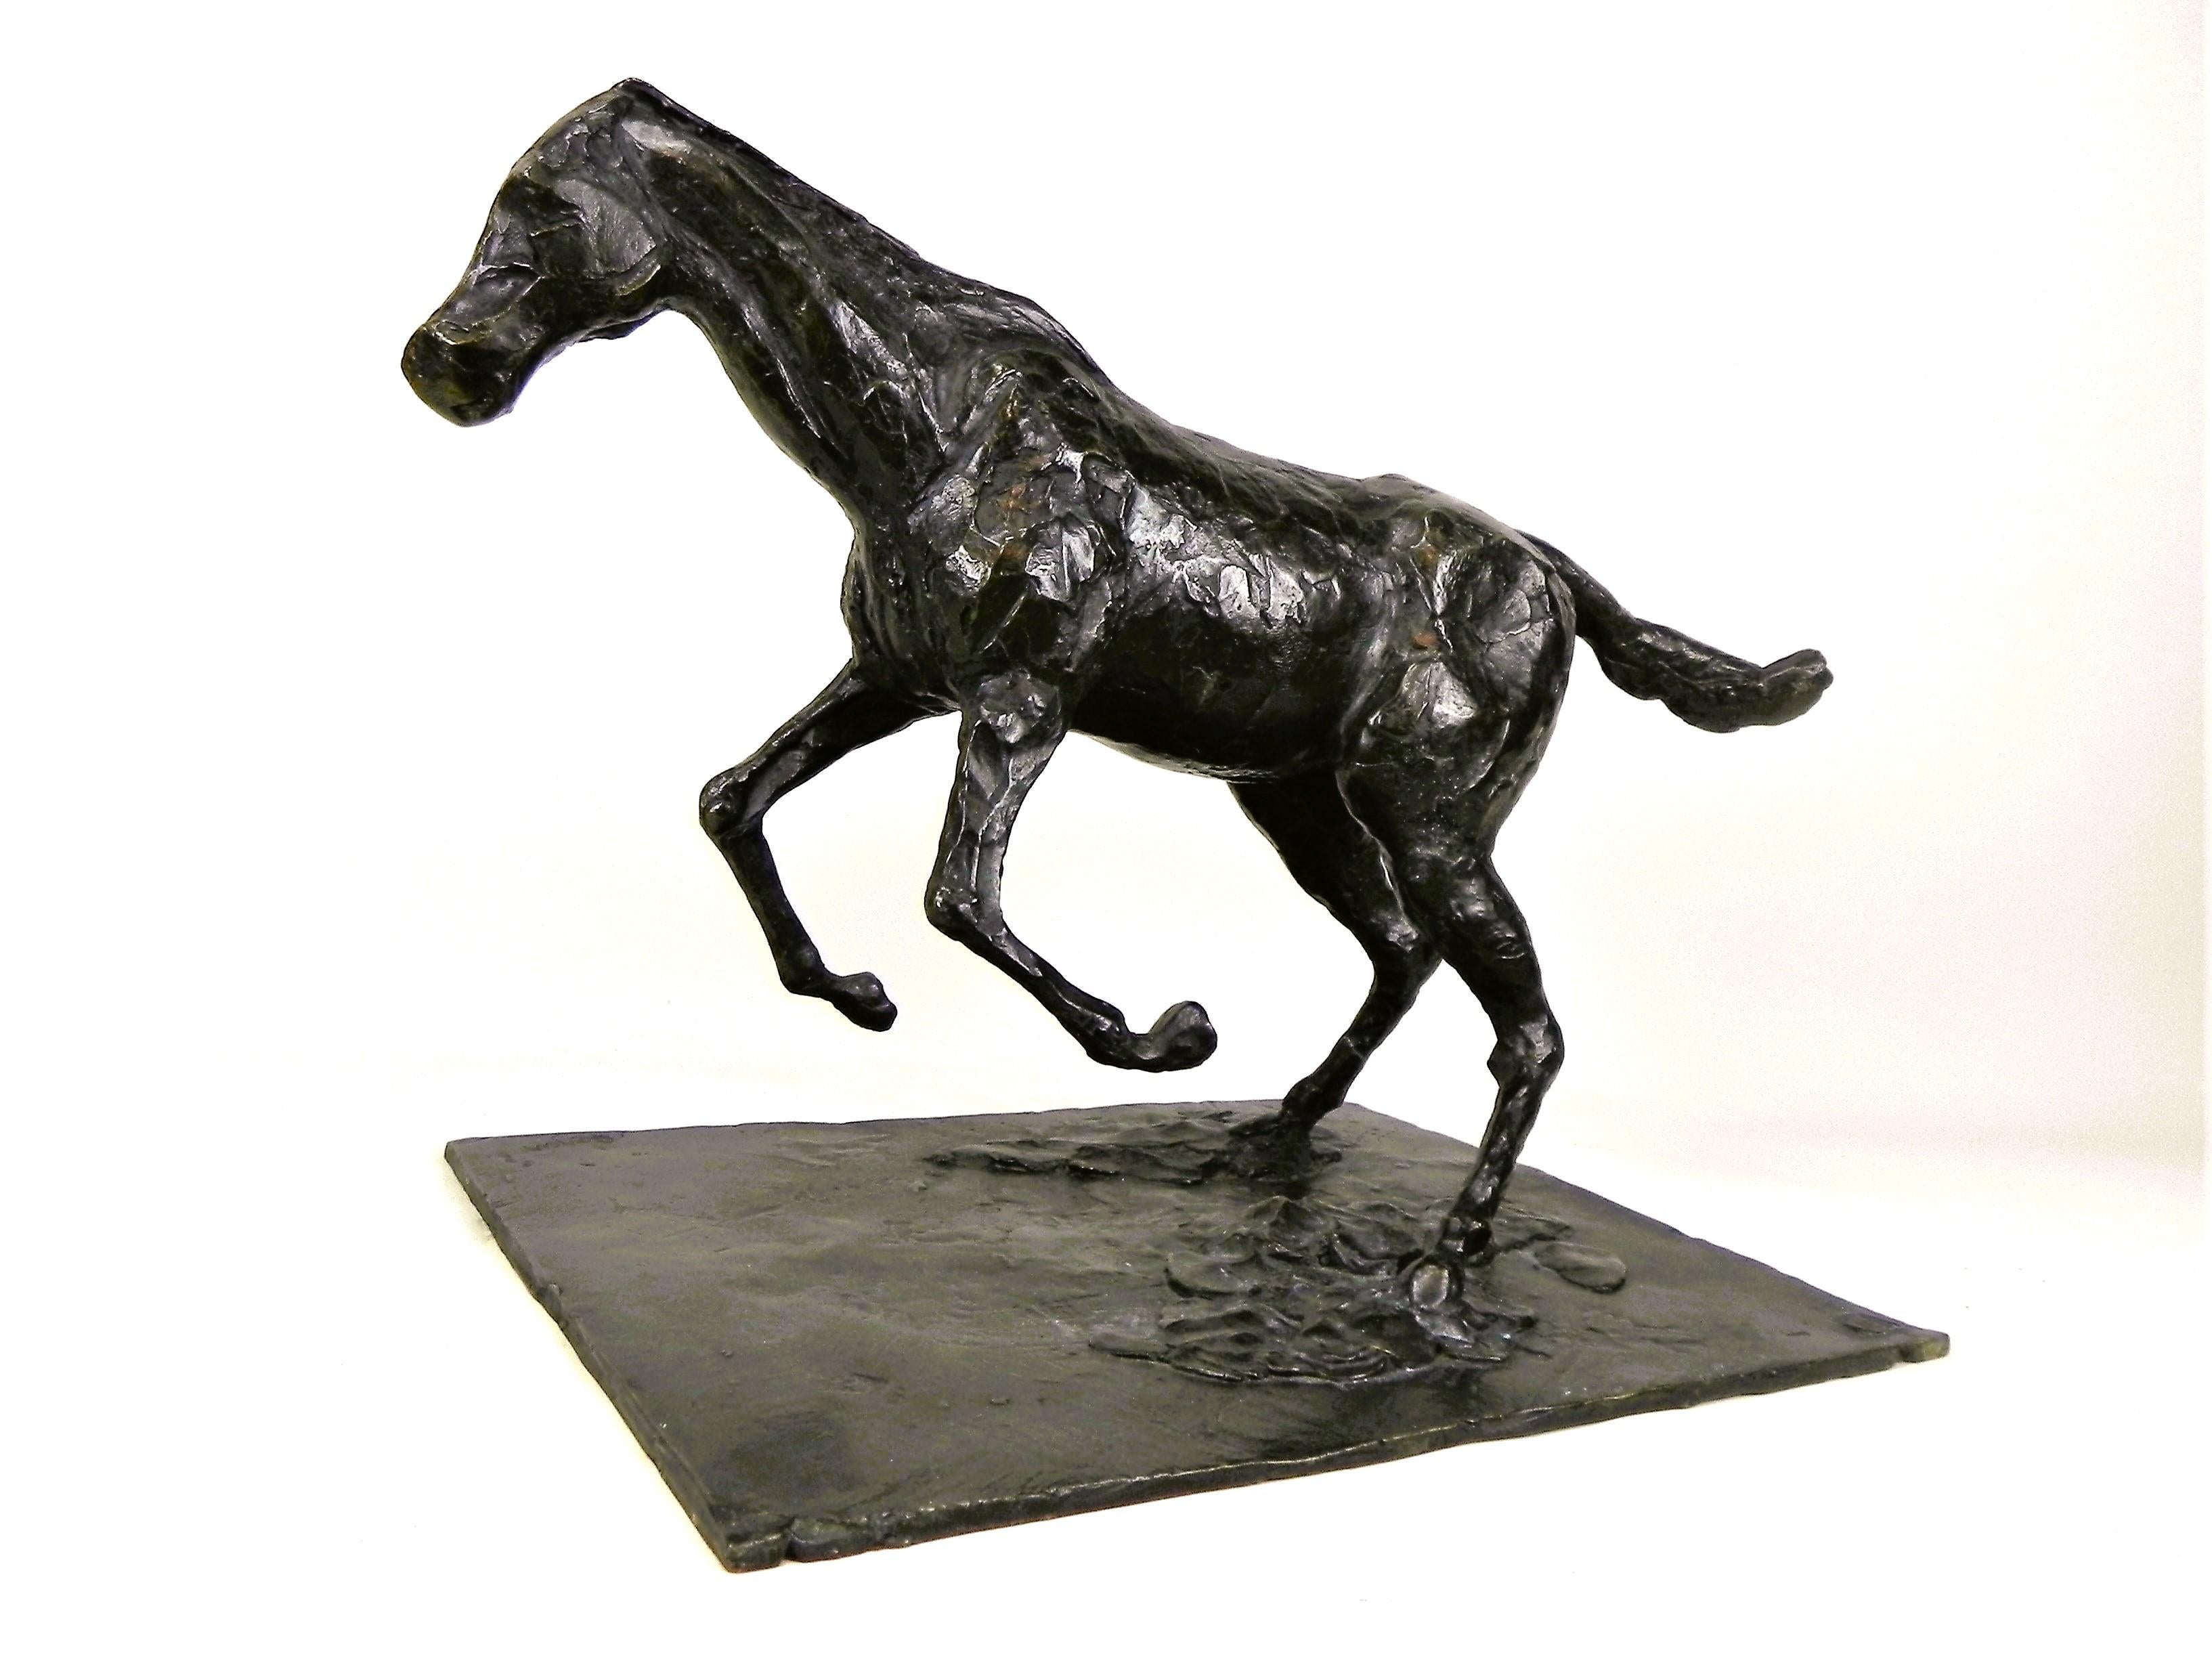 Edgard Degas: Horse Clearing an Obstacle (work 48 /certified by Comité Degas) - Impressionist Sculpture by Edgar Degas